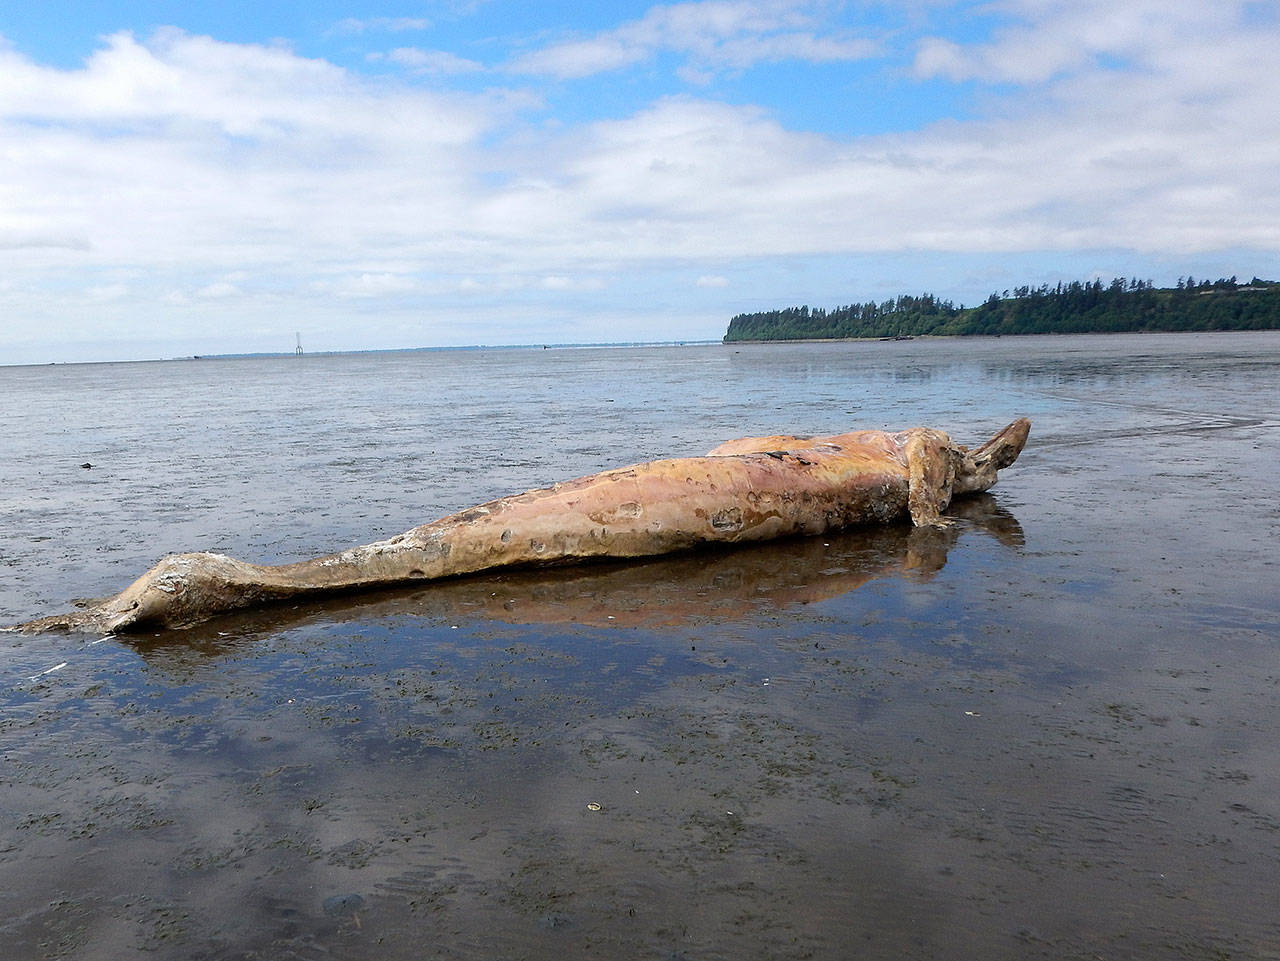 (Courtesy Jessie Huggins, Cascadia Research) The remains of a juvenile female gray whale were discovered near the western shore of Bowerman Airport on Monday. It’s approximately 24-feet-long. There was no indication of entanglement, said Jessie Huggins from Cascadia Research. She said it had probably been dead for a couple weeks, and that it was likely one or two years old. You can view it from the furthest viewing point on the Sandpiper Trail with a good camera or binoculars.